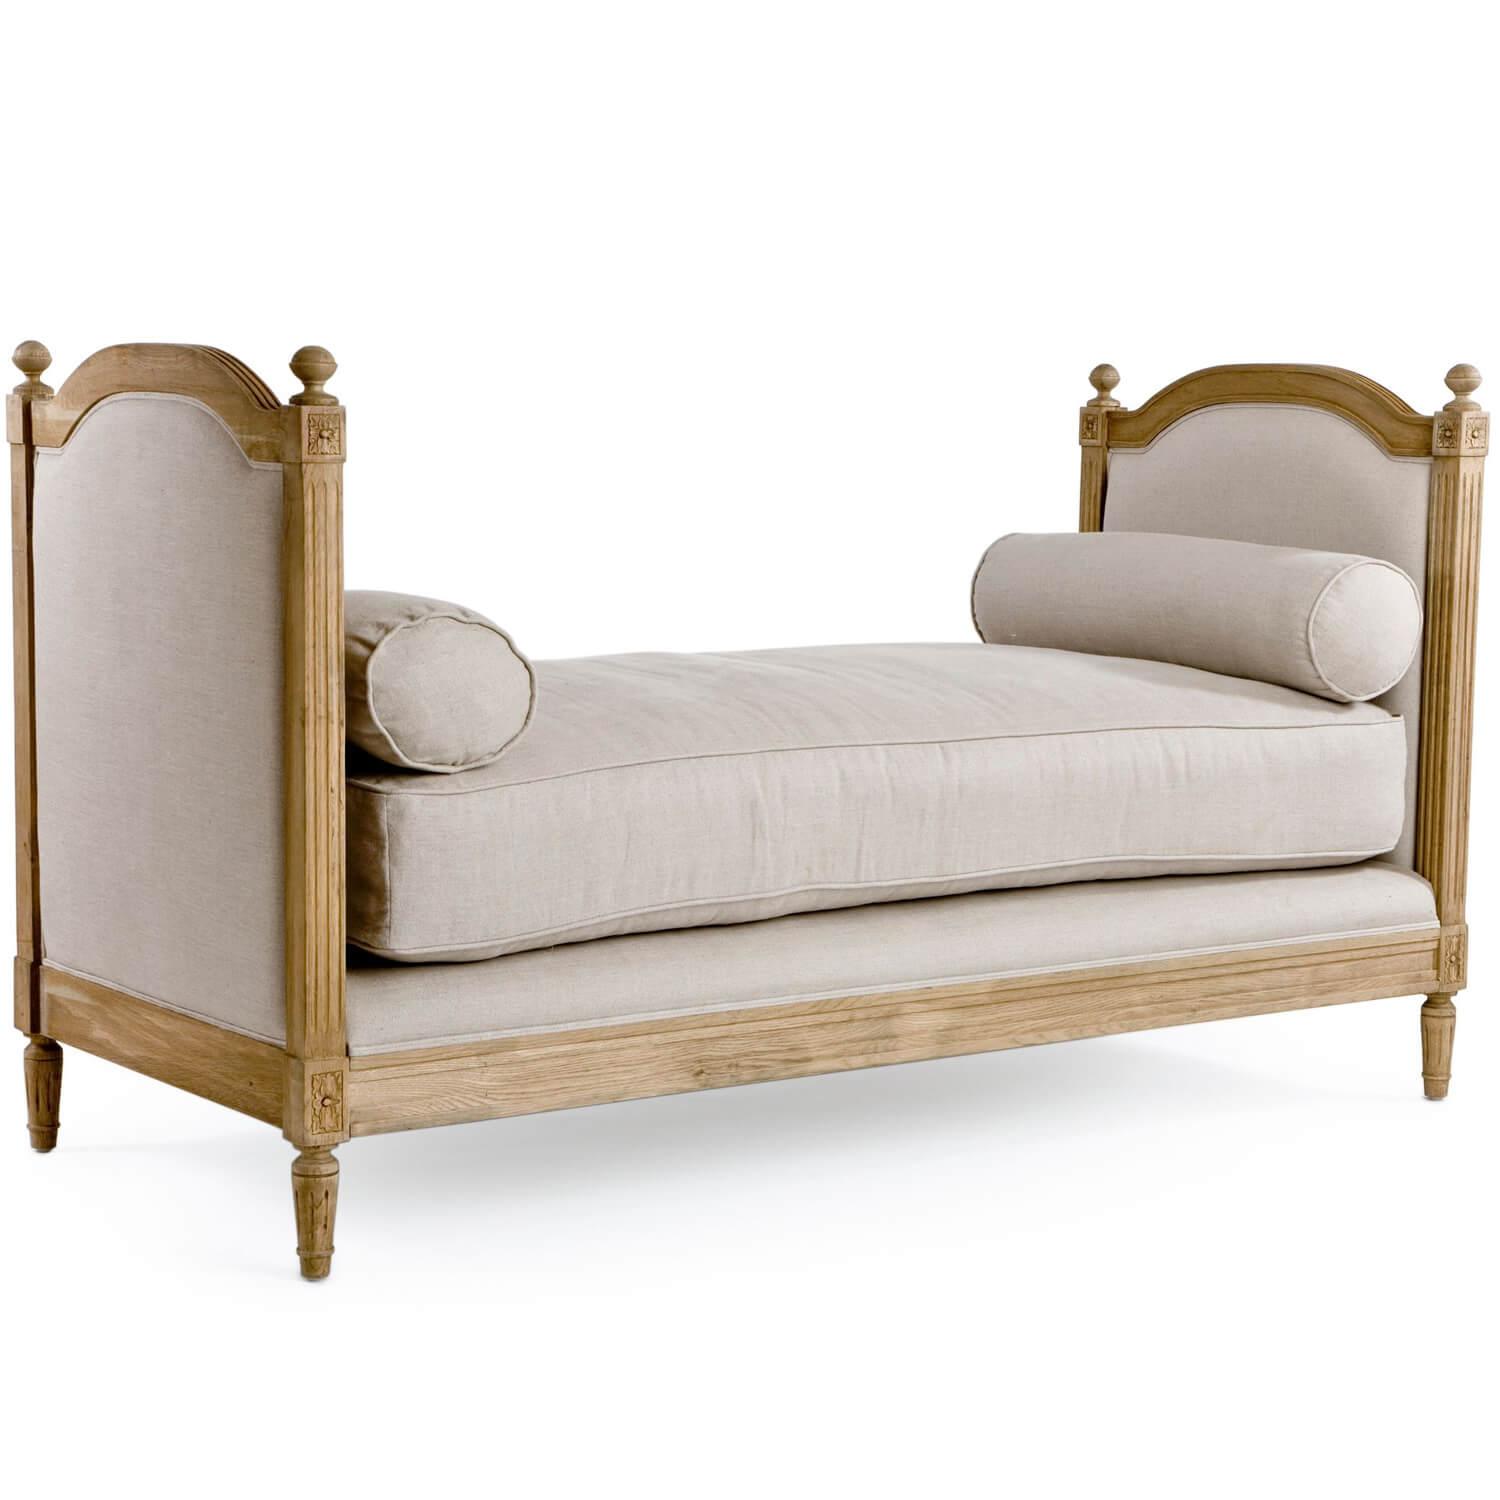 Vintage French Daybed / Sofa - Belle Escape